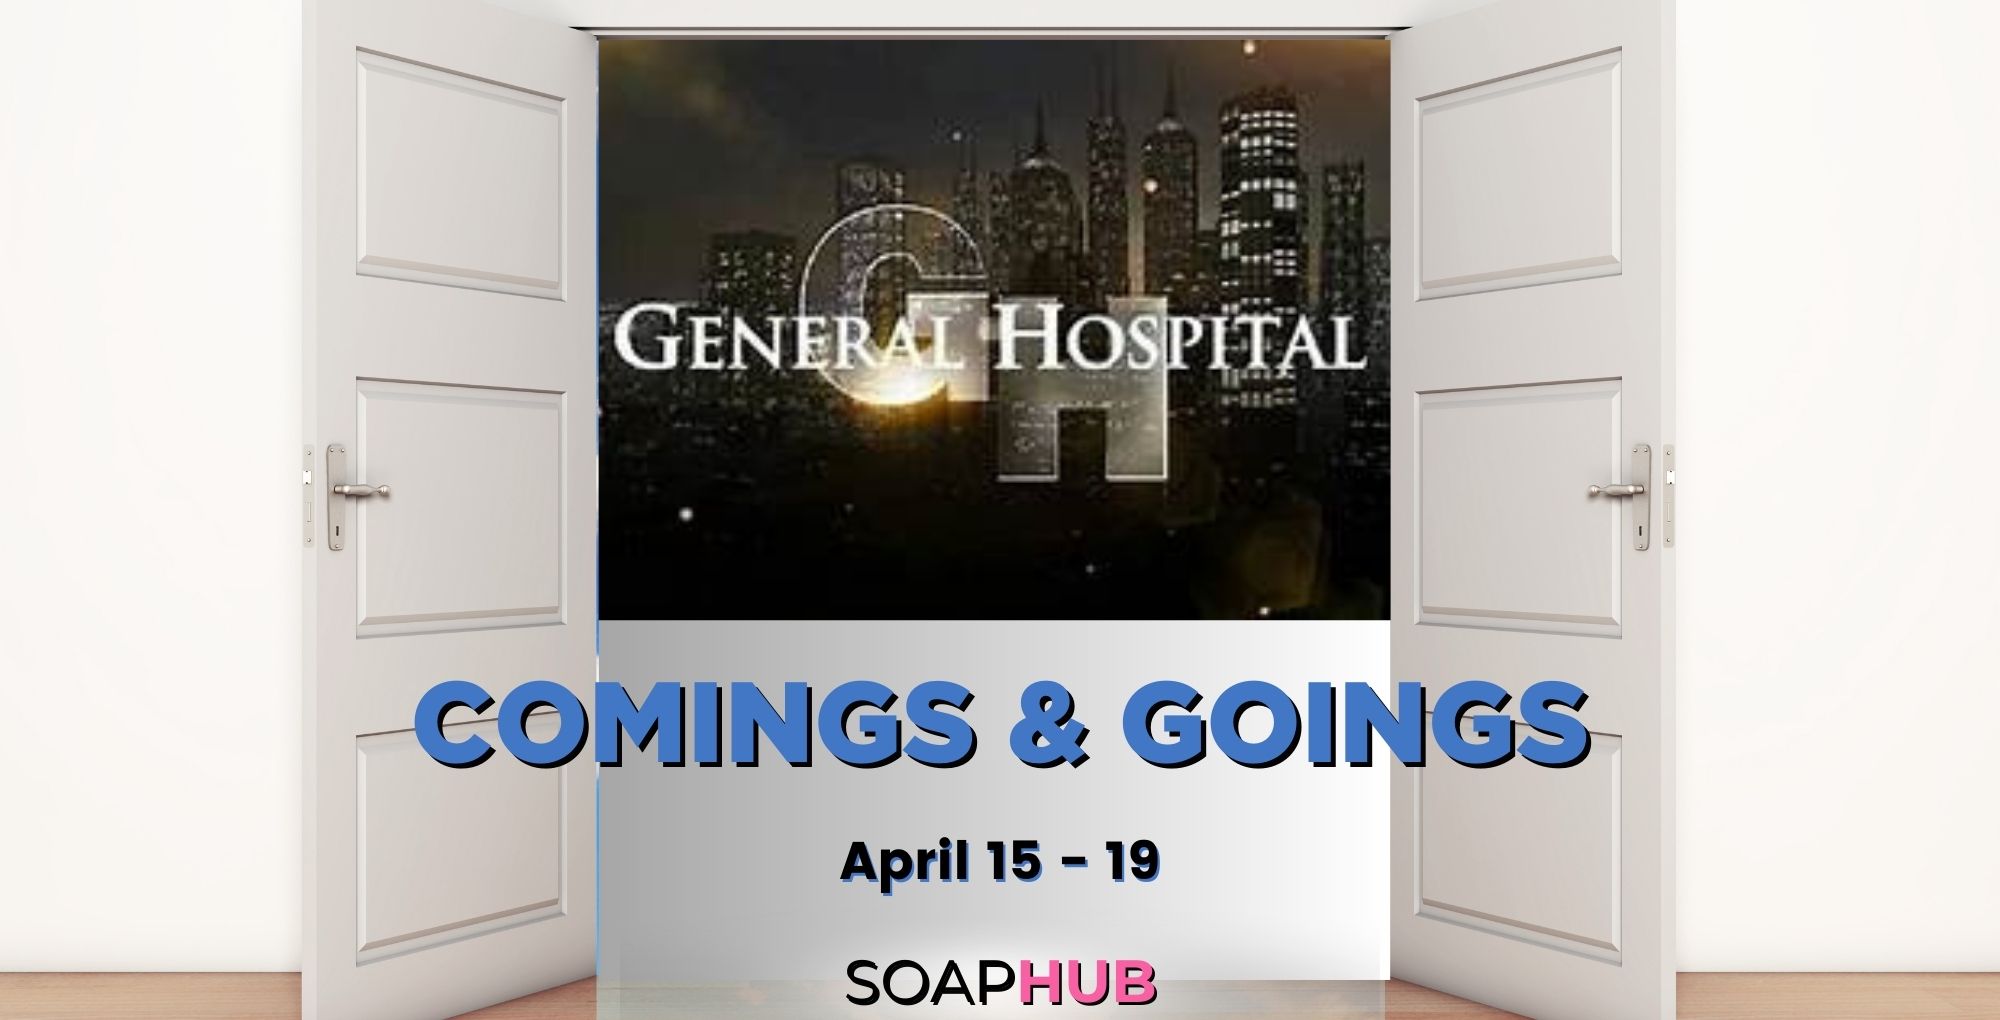 General Hospital comings and goings for the week of April 15 with the Soap Hub logo across the bottom.